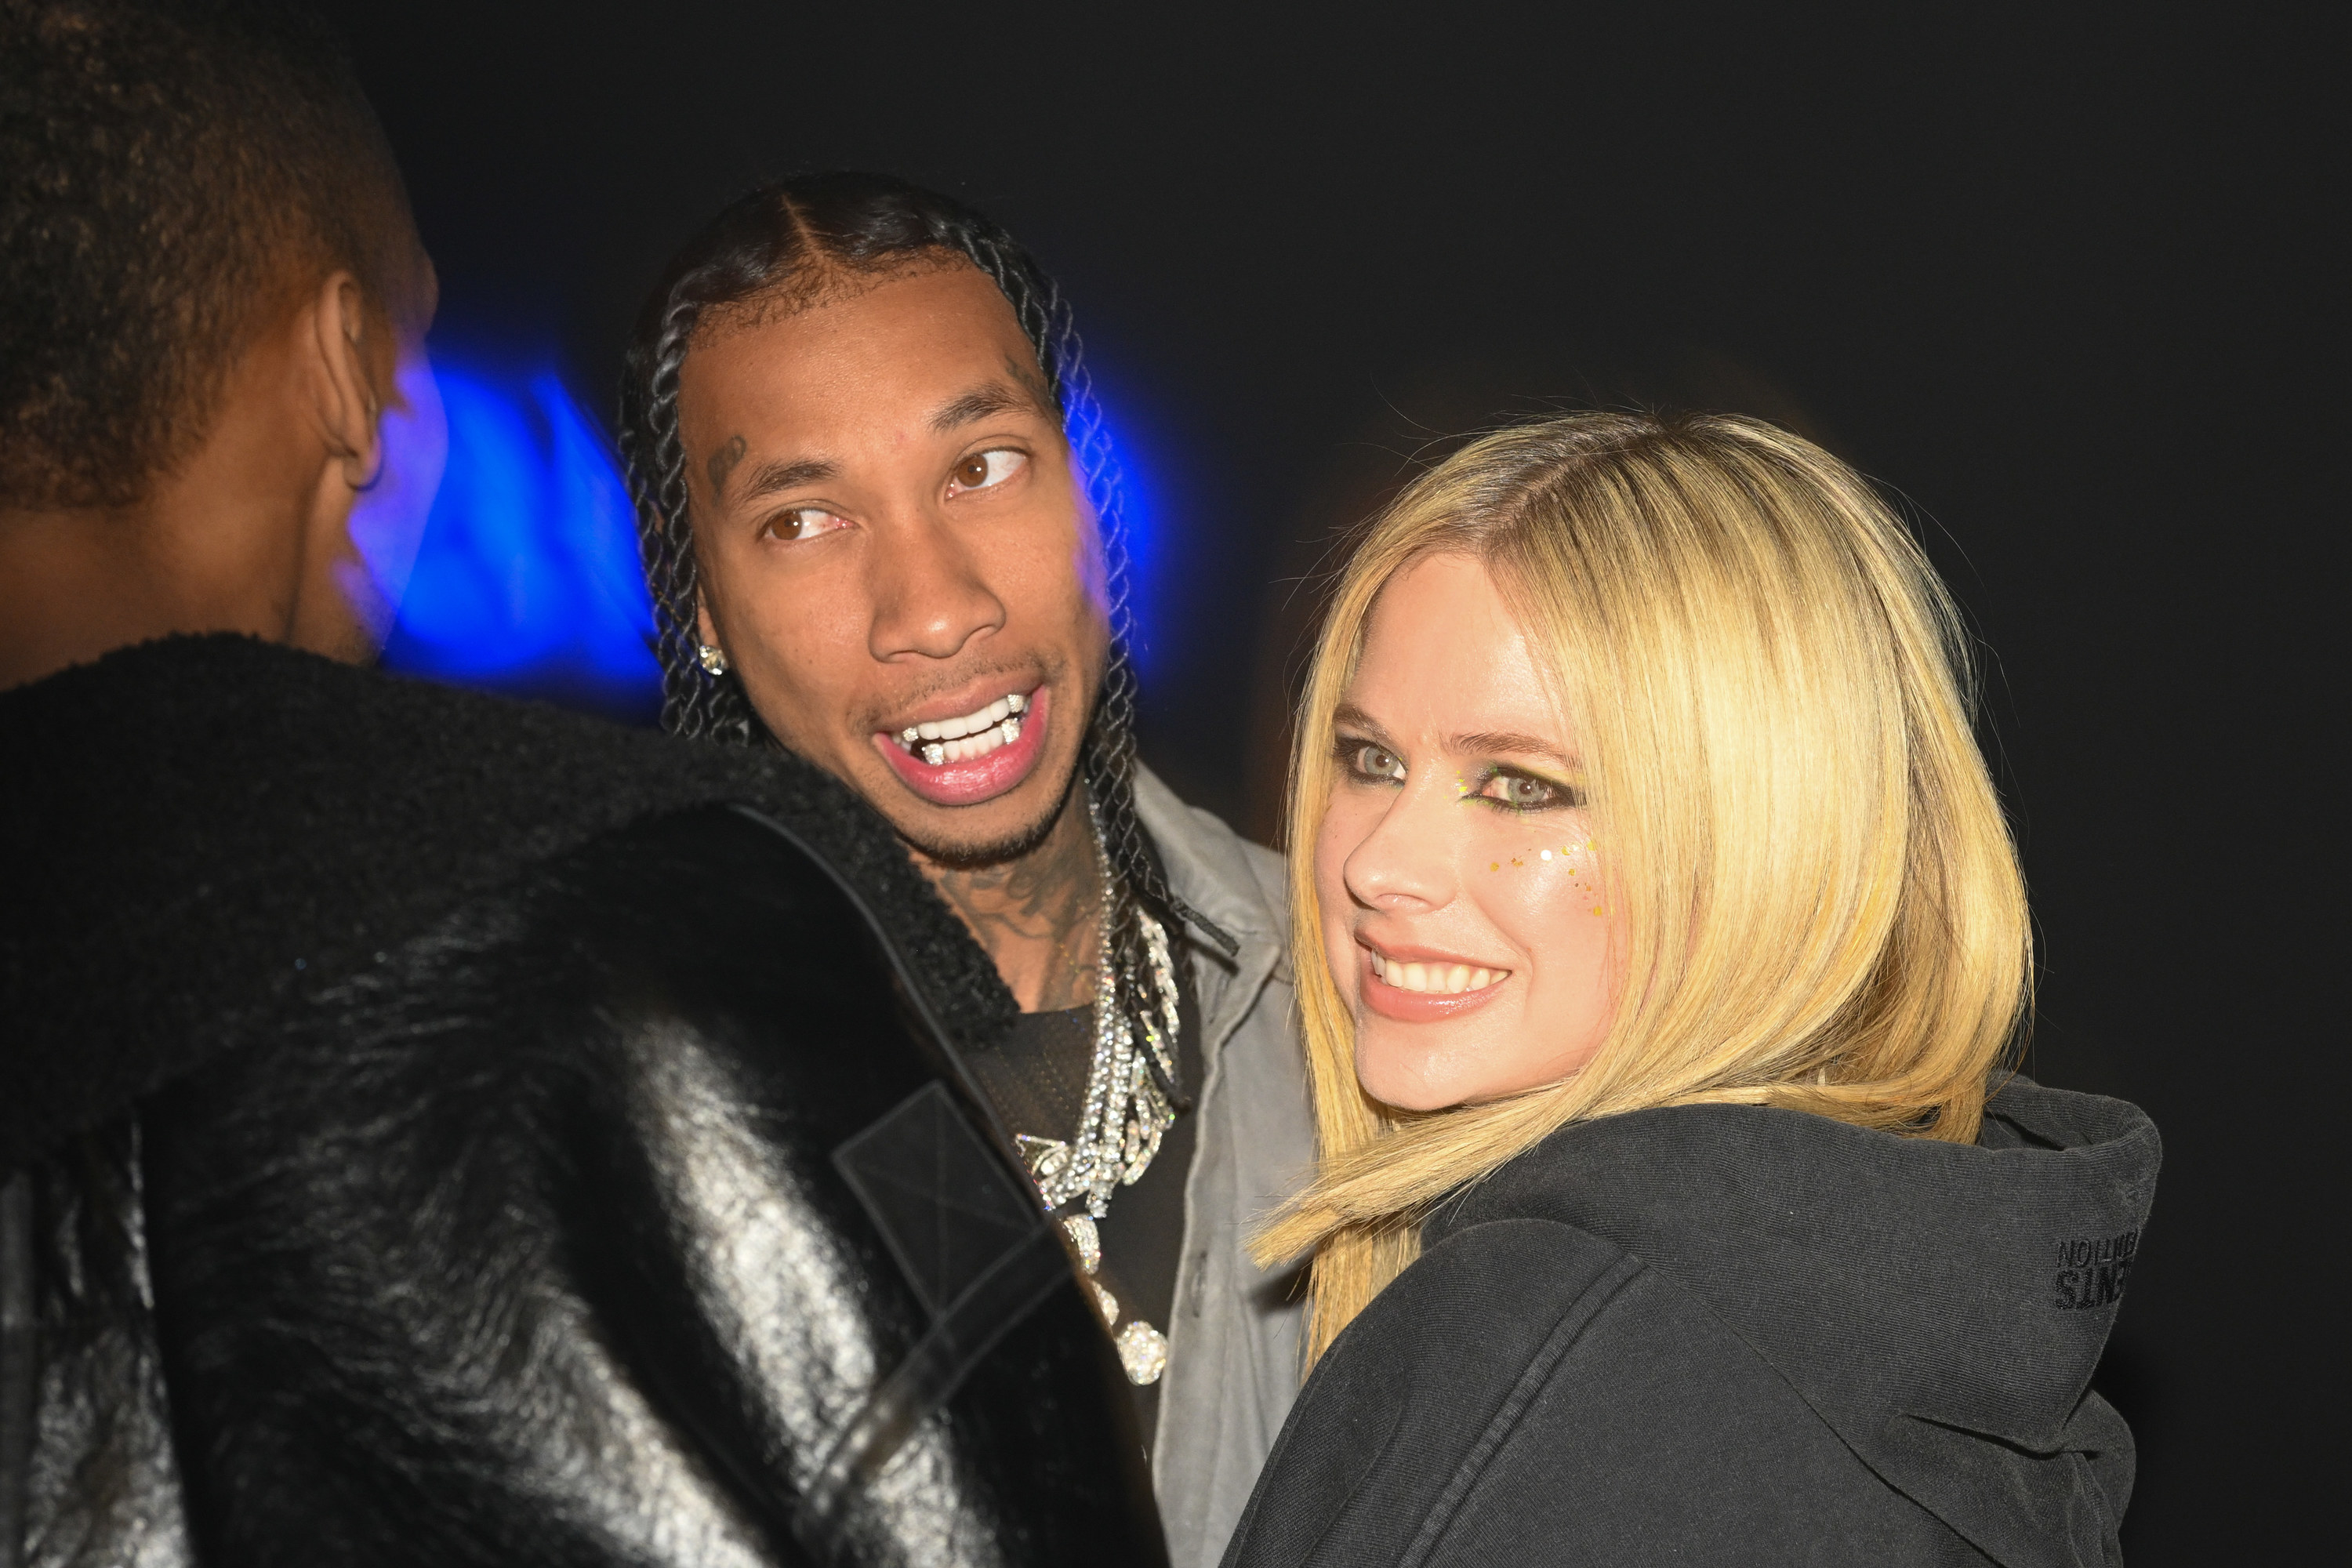 Tyga and Avril Lavigne attend the Mugler x Hunter Schafer party as part of Paris Fashion Week at Pavillon des Invalides on March 06, 2023 in Paris, France